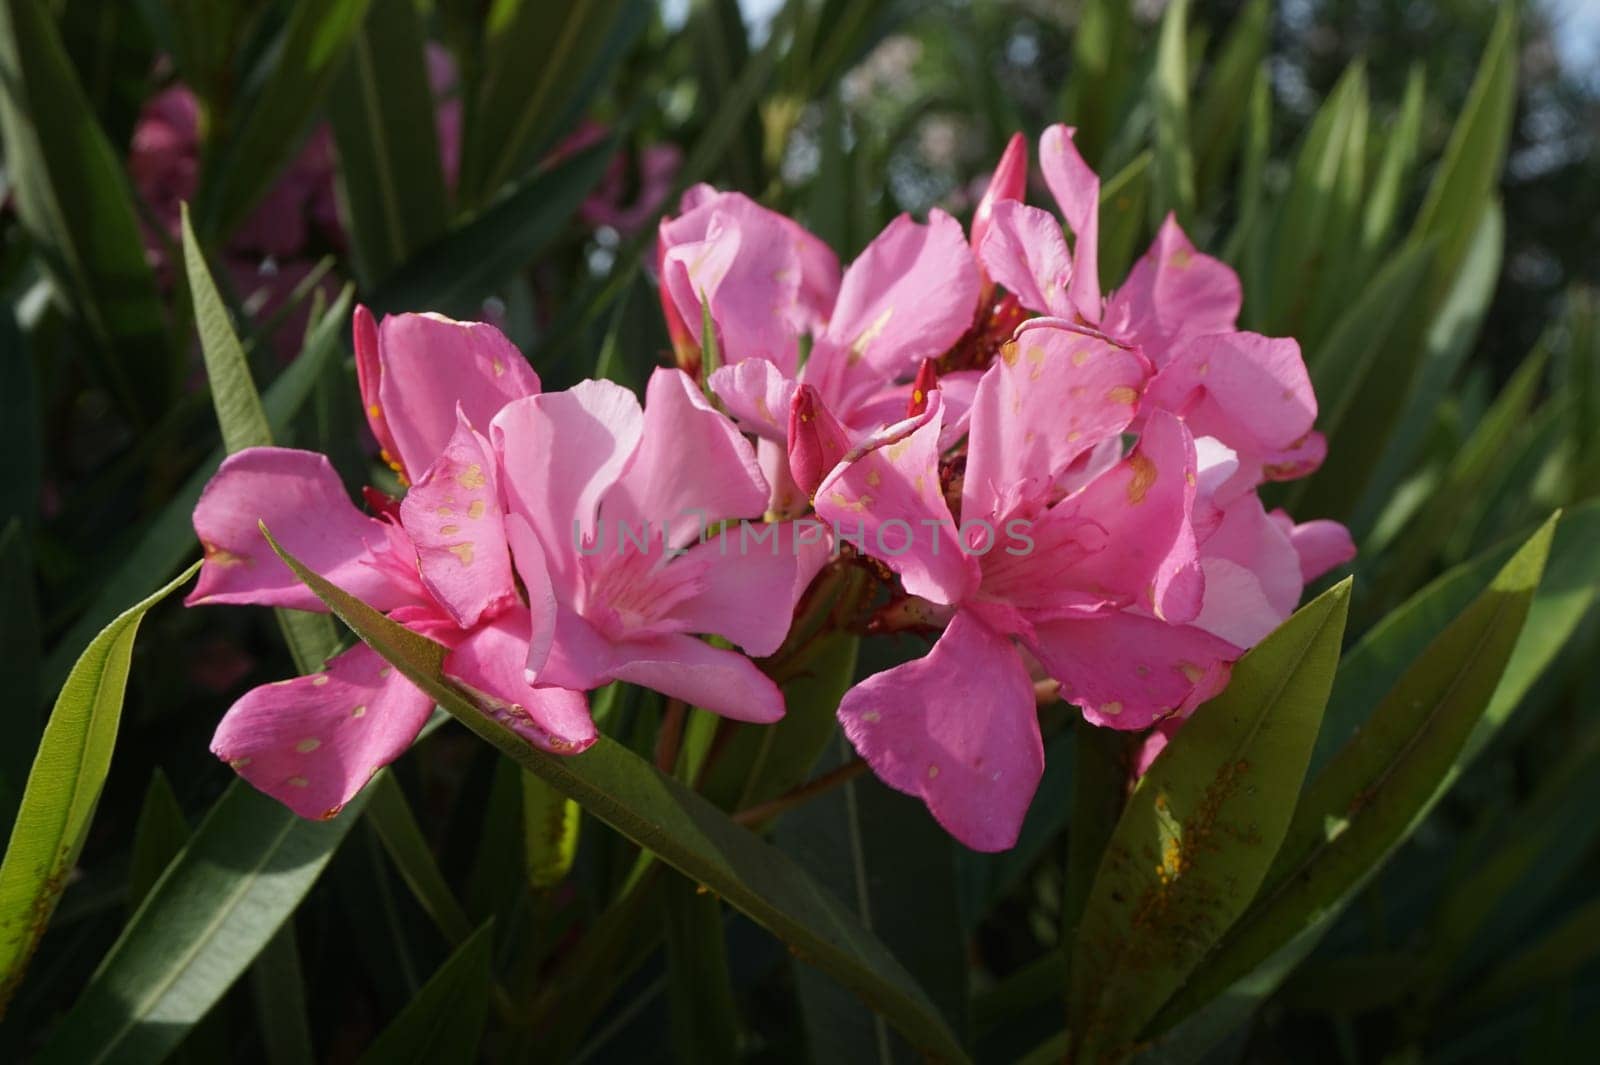 Close-up of Oleander nerium bright pink flowers in bloom, green leaves on the branches of an ornamental shrub in daylight.